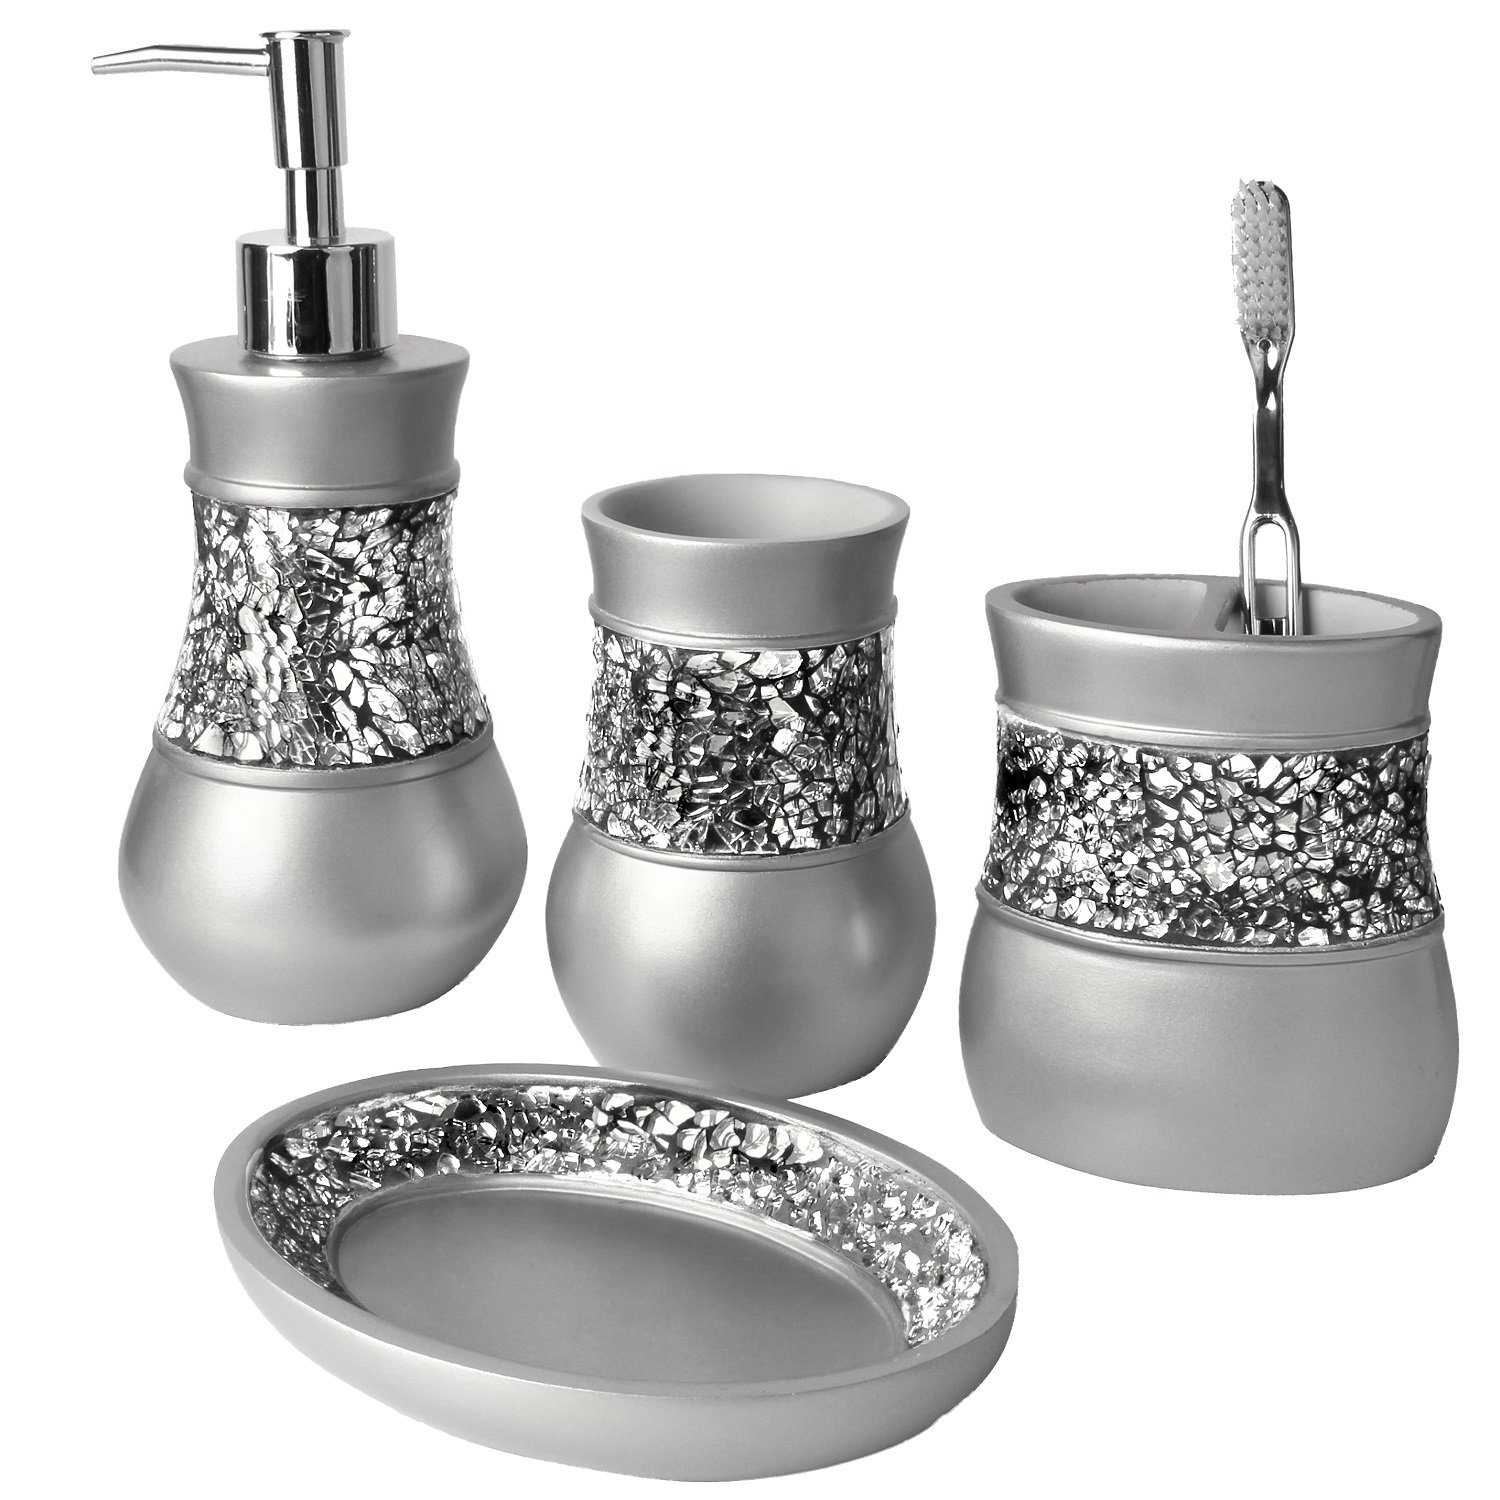 Book Cover Creative Scents Gray Bathroom Accessories Set - 4 Piece Bathroom Decor Set for Home, Bath Restroom Set Features Soap Dispenser, Toothbrush Holder, Tumbler, Soap Dish - Bling Silver Mosaic Glass